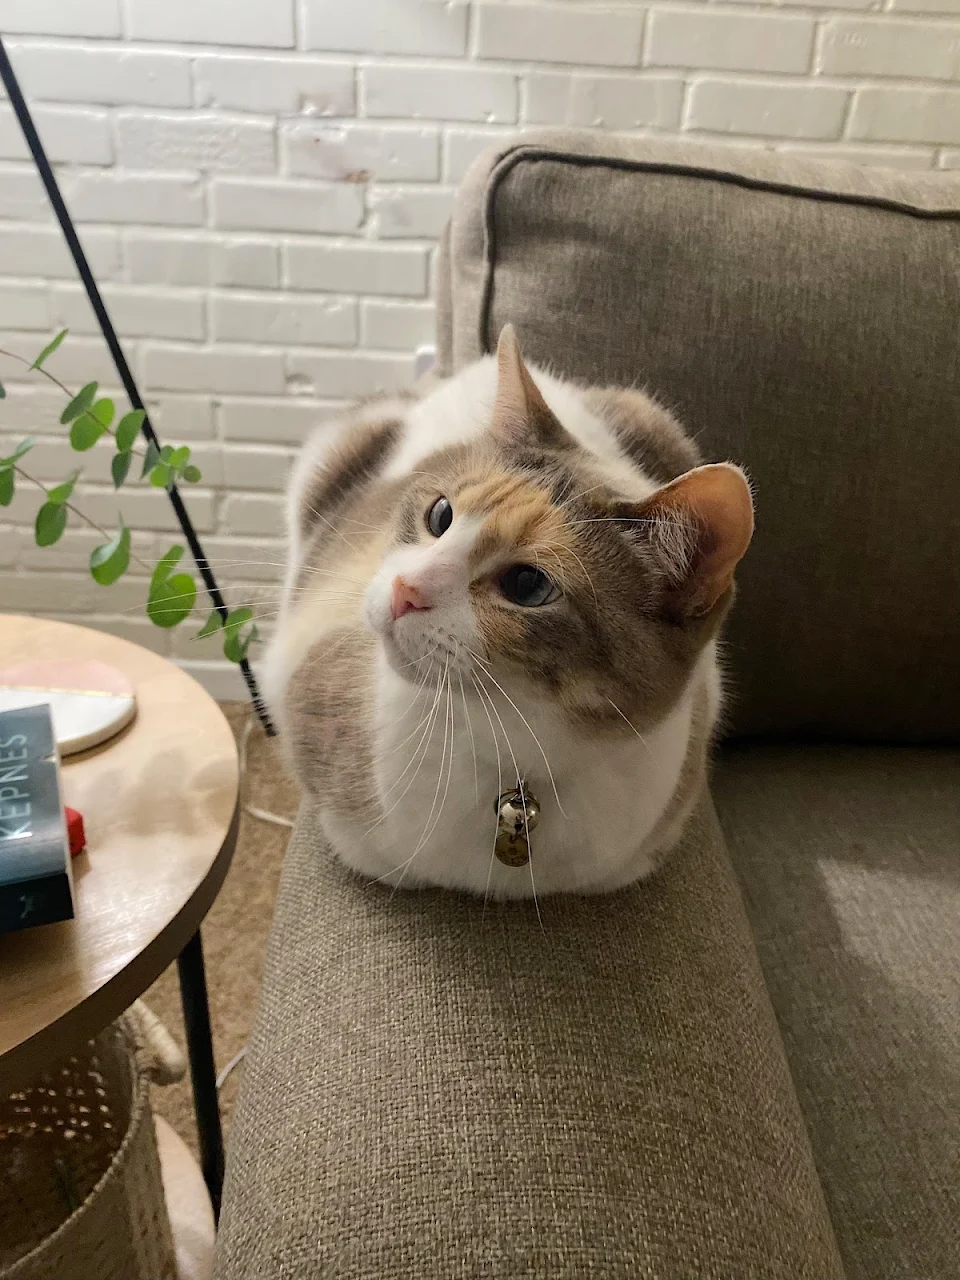 Such a good loaf